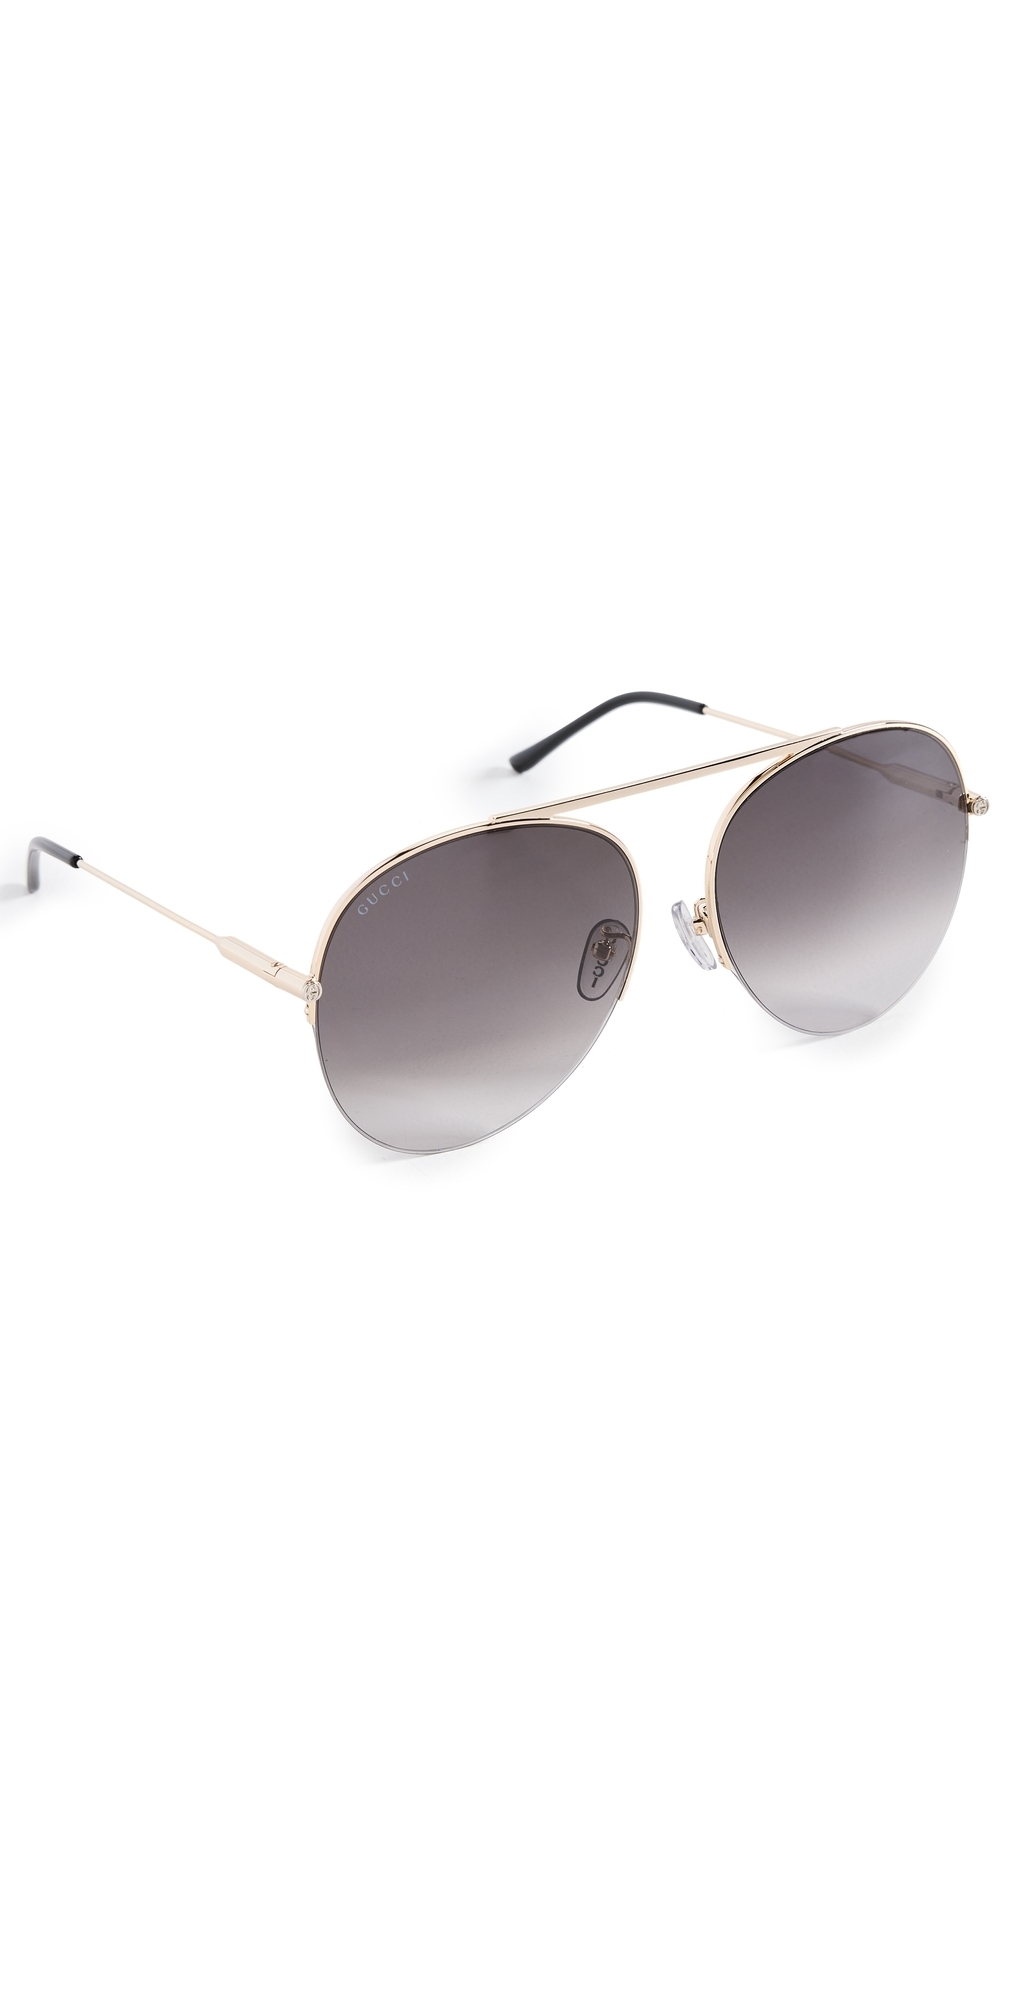 Gucci Oval Sunglasses Gold-Gold-Grey One Size